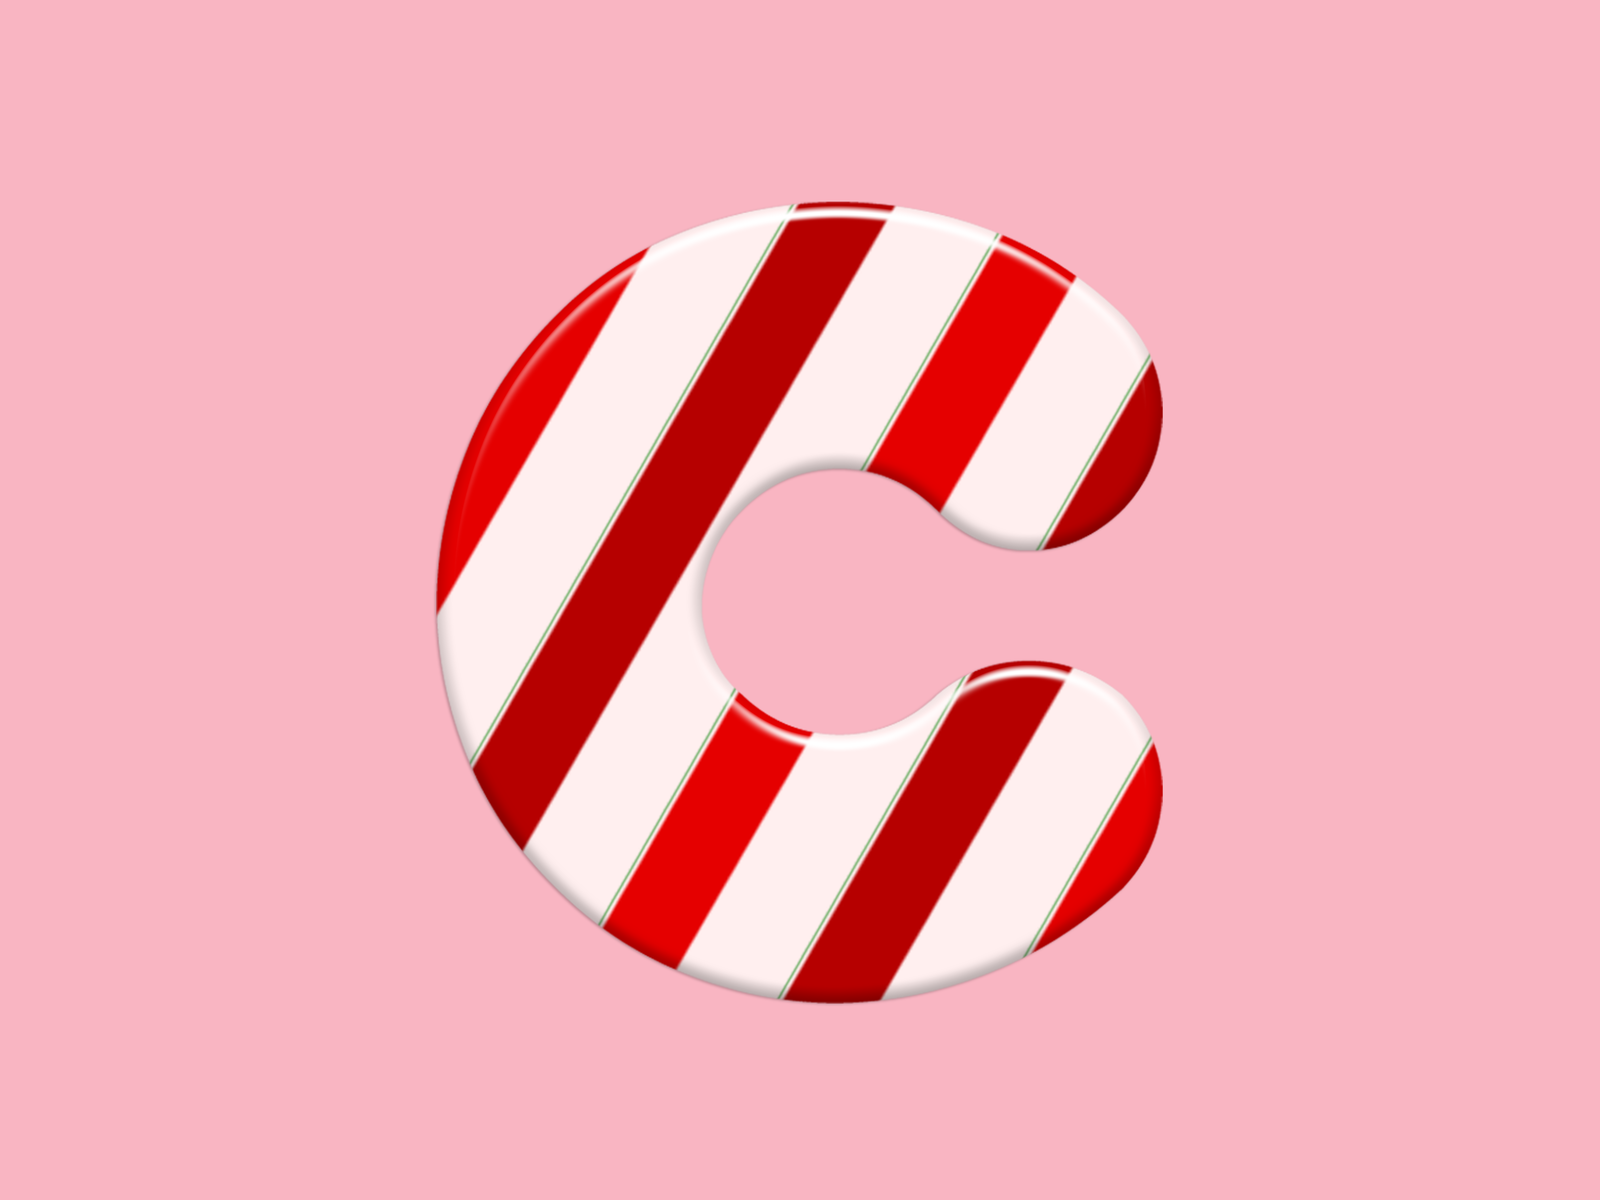 candy-cane-letter-c-by-georgina-henshall-on-dribbble